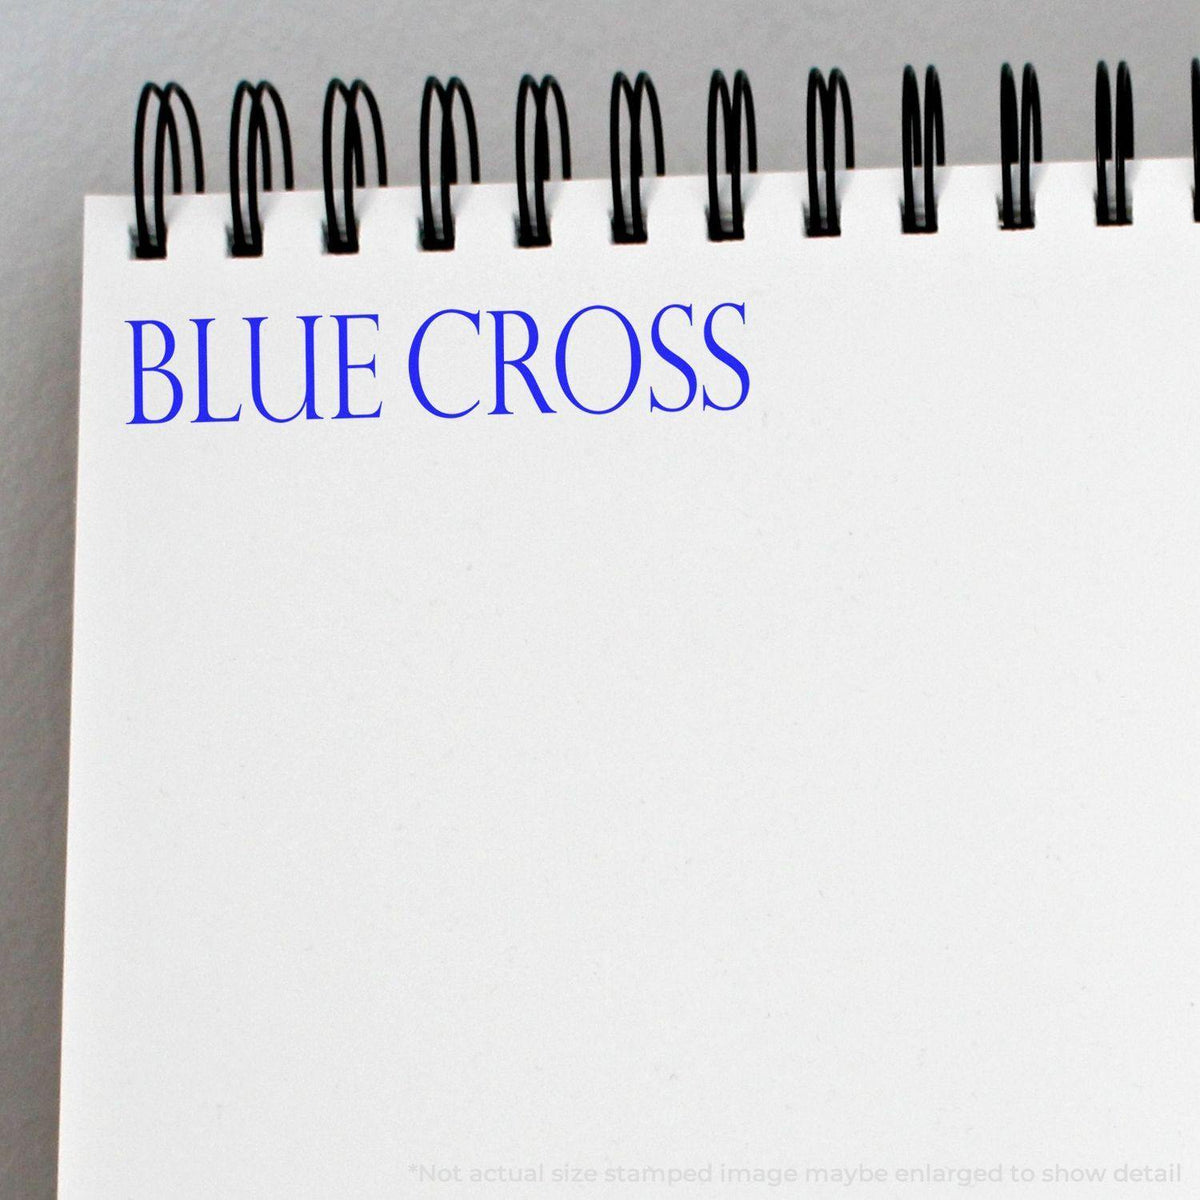 Blue Cross Rubber Stamp In Use Photo